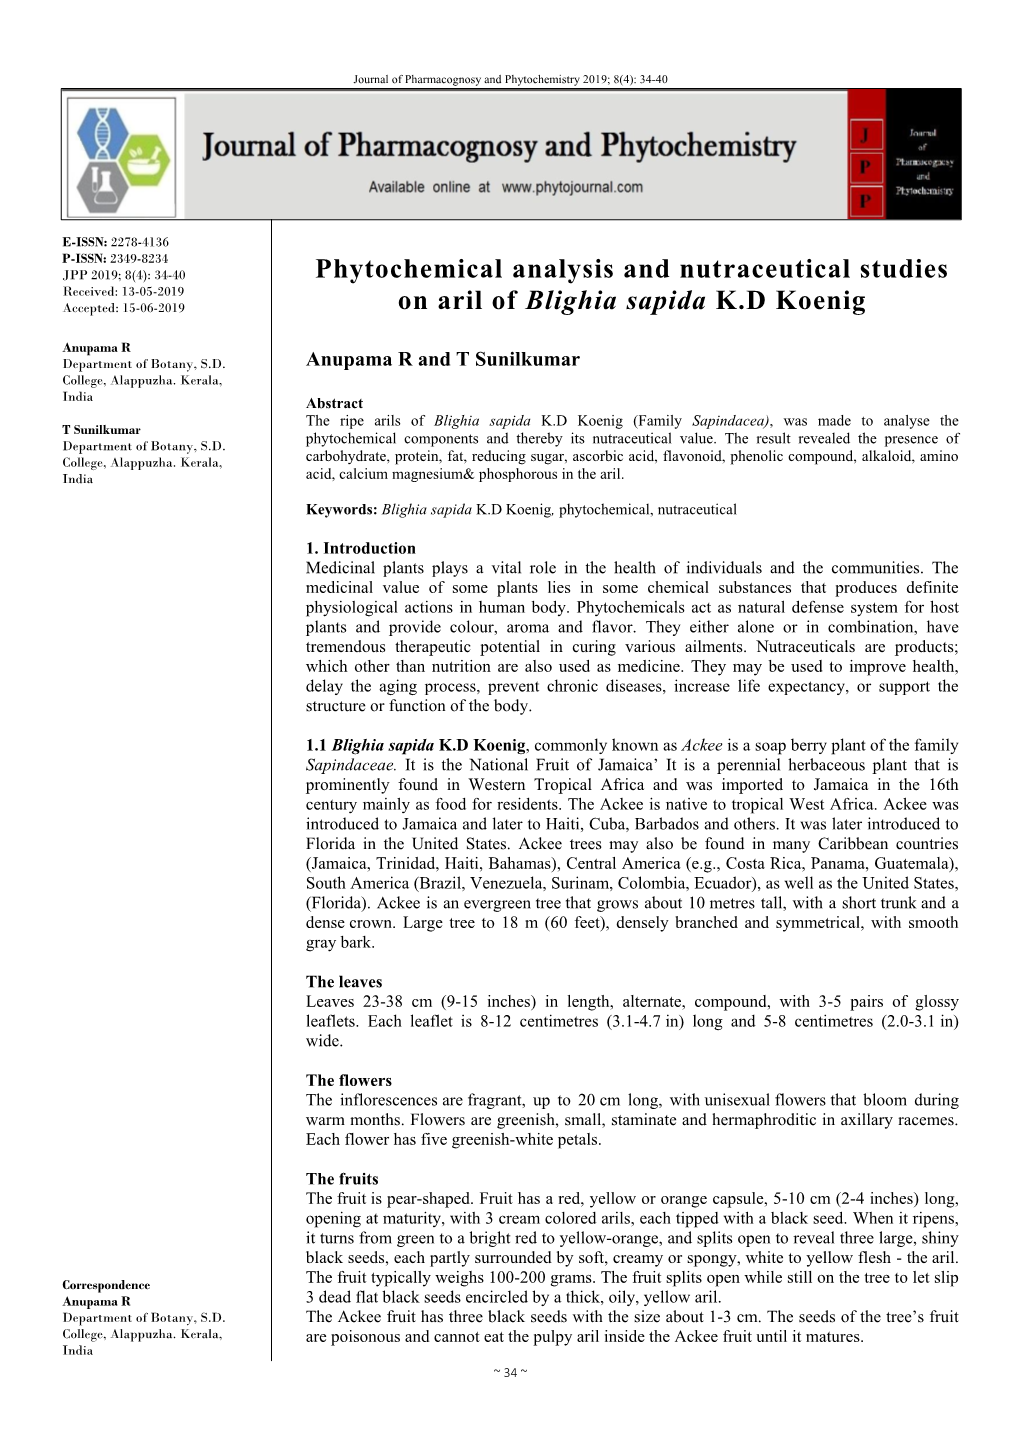 Phytochemical Analysis and Nutraceutical Studies on Aril Of